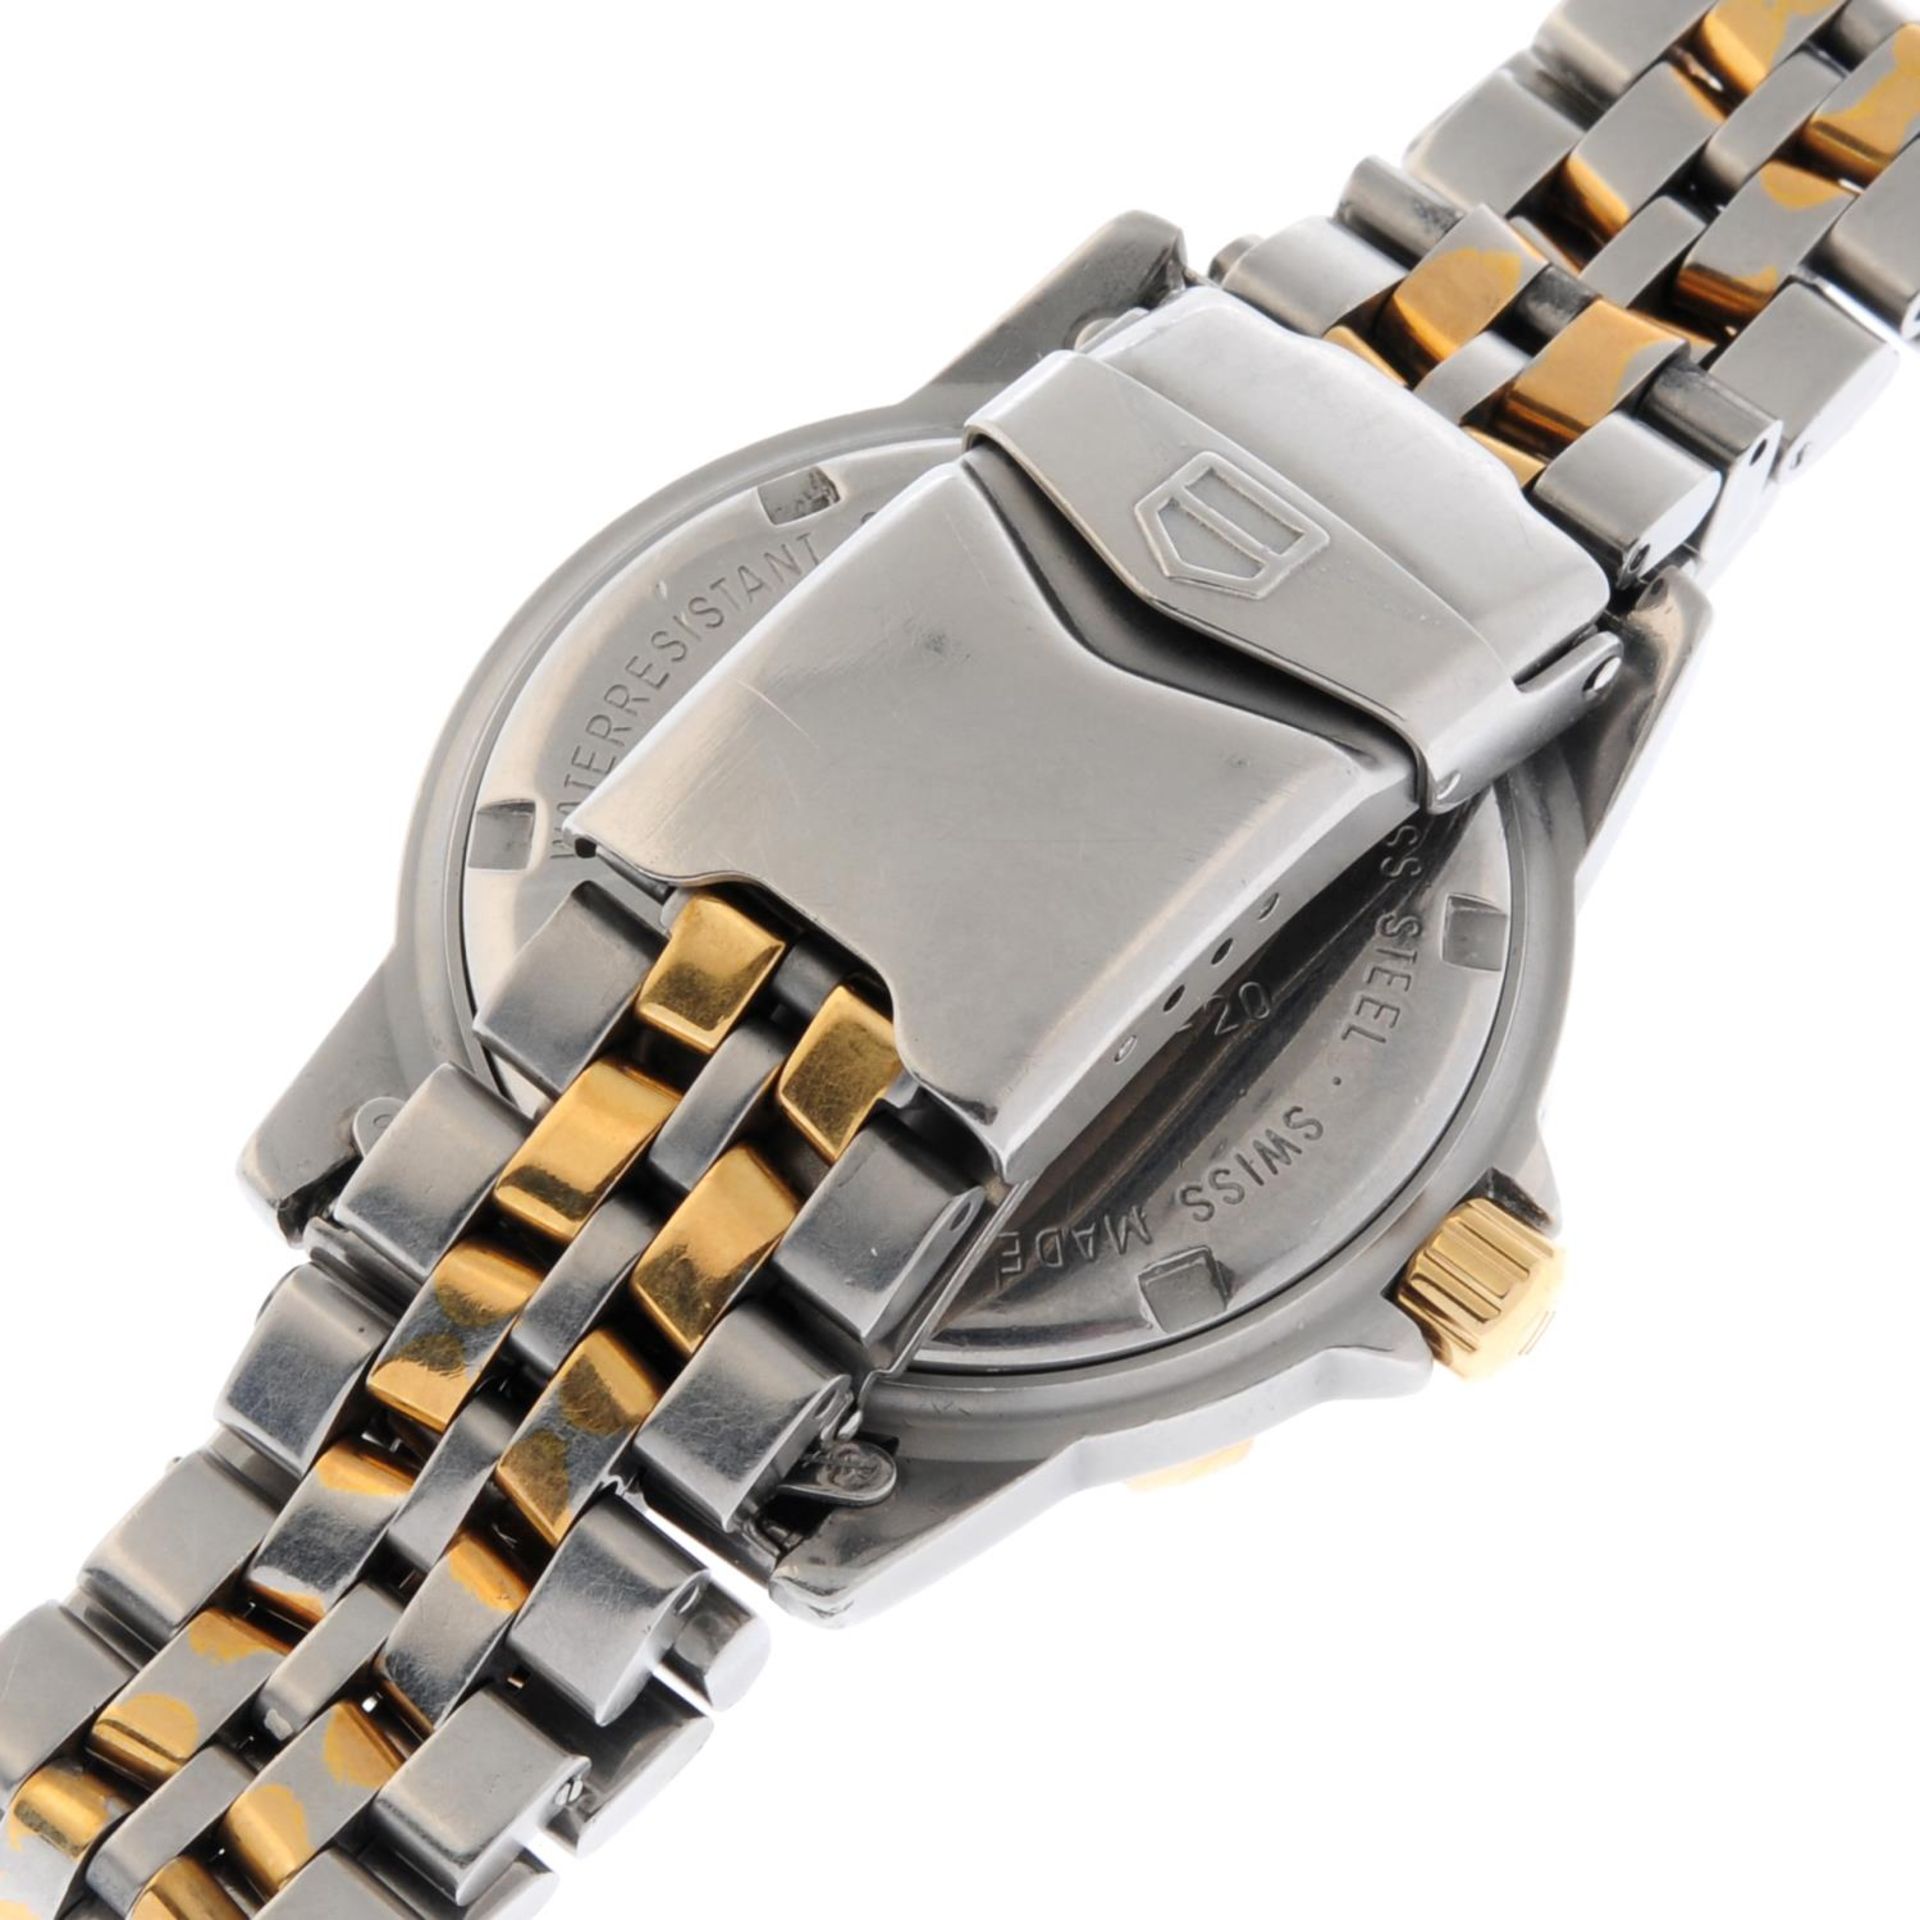 TAG HEUER - a 1500 Series bracelet watch. - Image 2 of 4